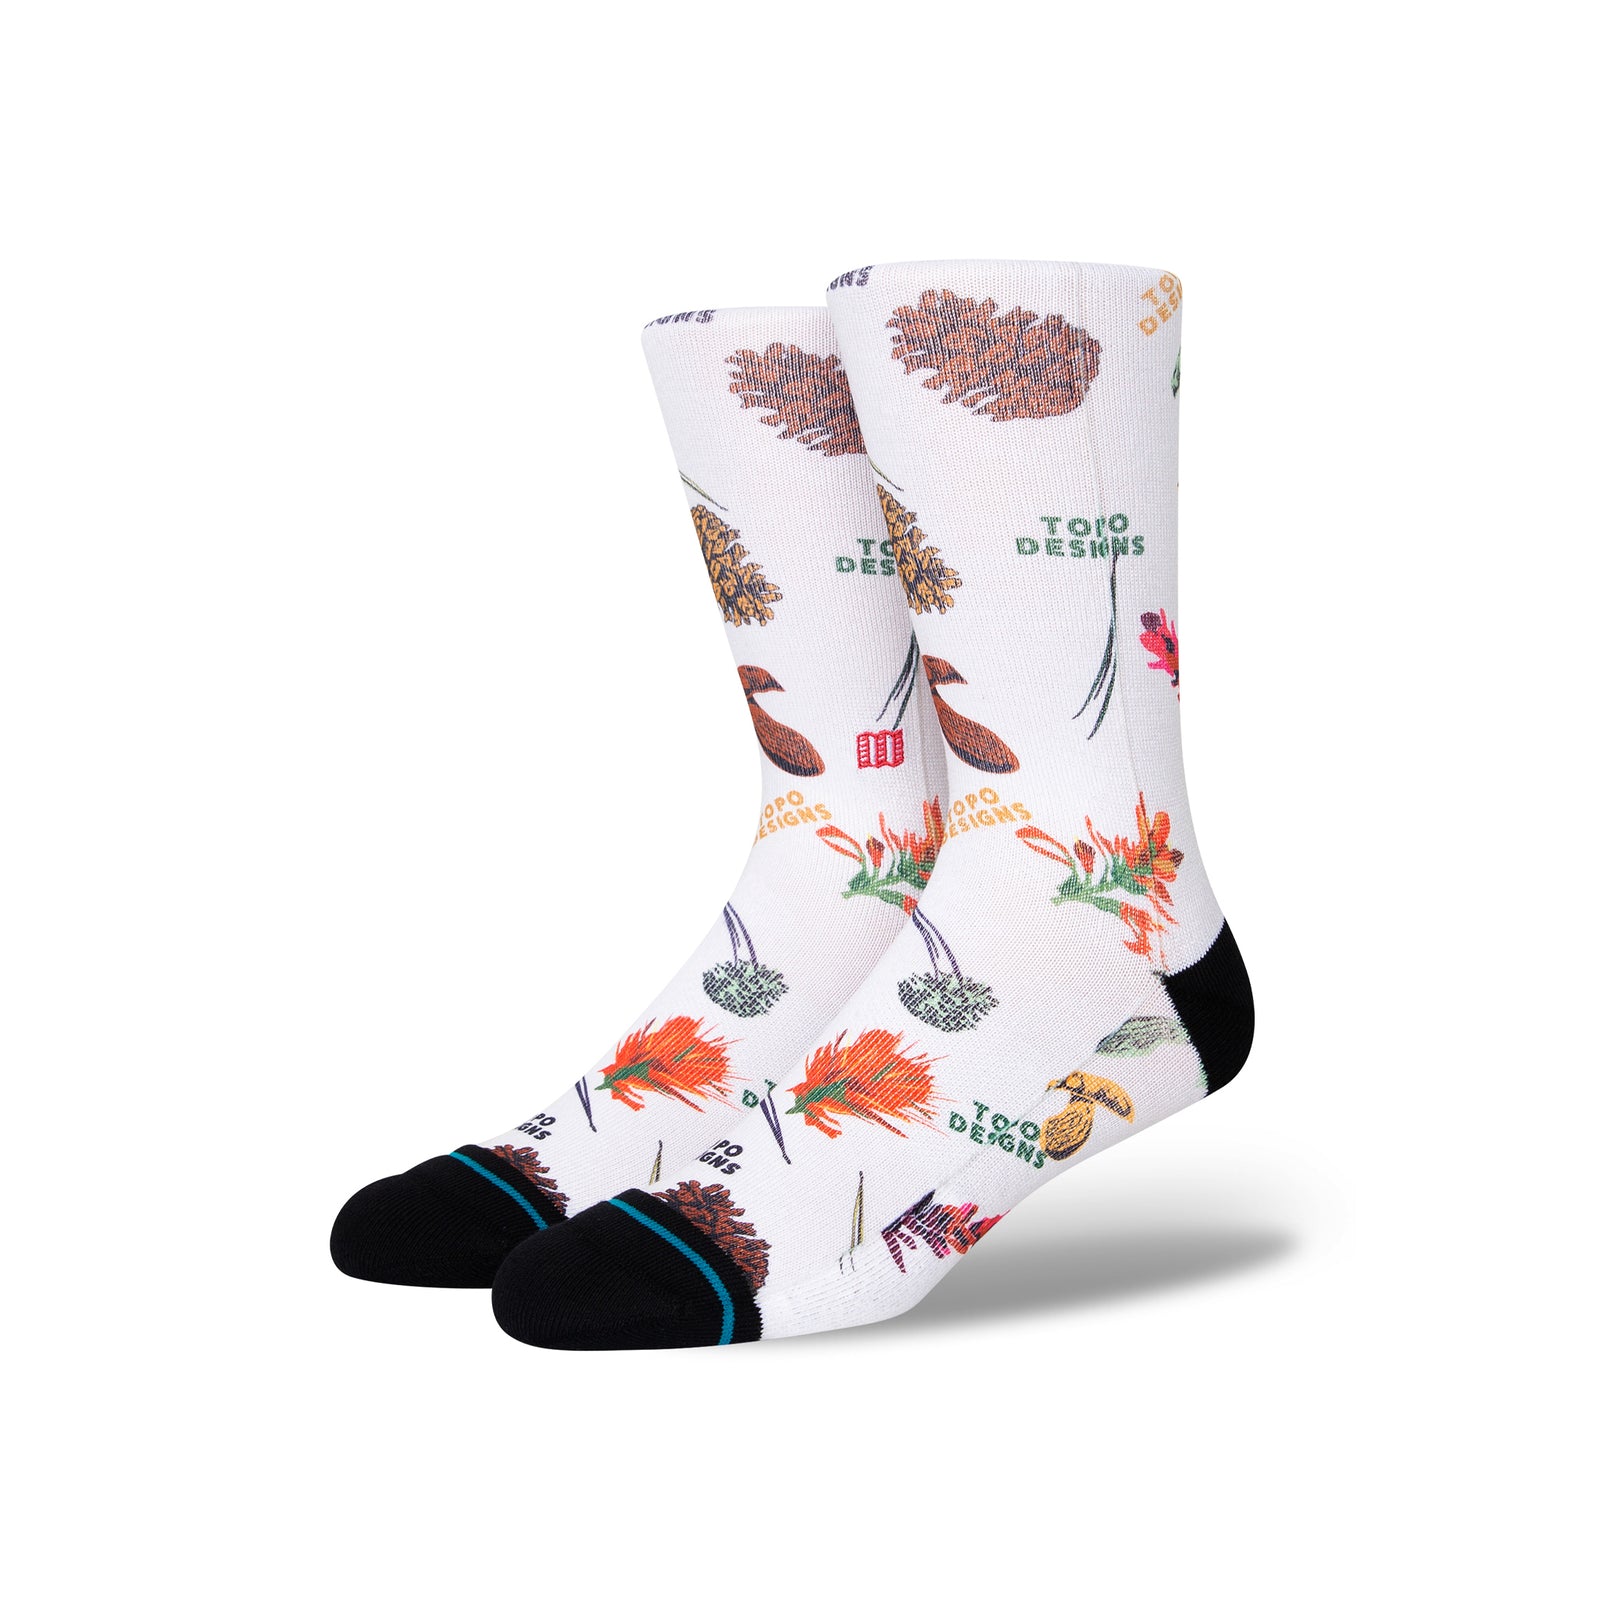 Topo Designs x Stance Crew Socks with wildflowers, pinecones, and mushrooms graphic print.